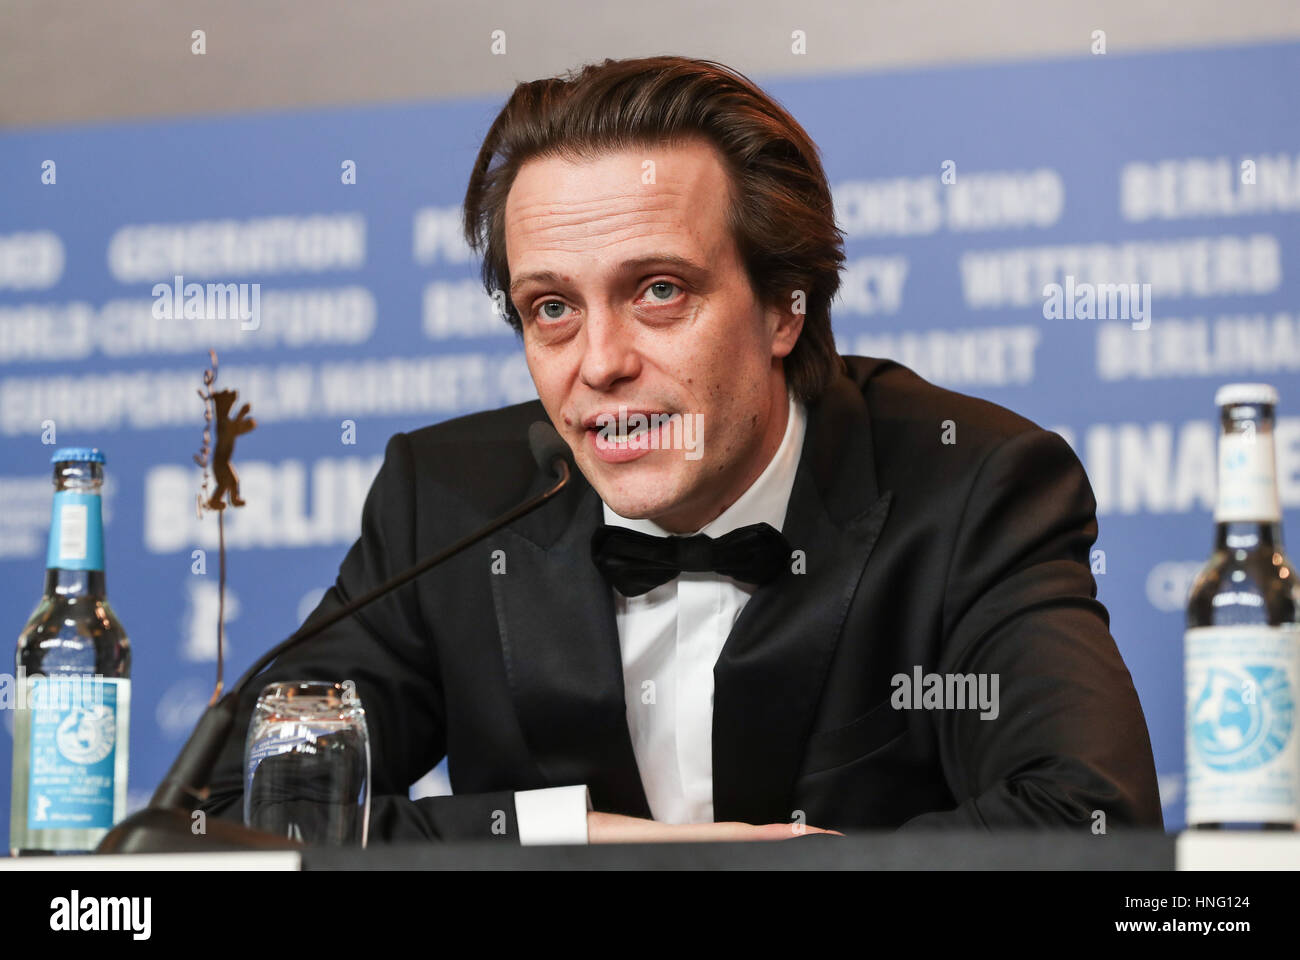 Berlin, Germany. 12th Feb, 2016. Actor August Diehl attends a press conference for the film Le jeune Karl Marx (The Young Karl Marx) during the 67th Berlinale International Film Festival in Berlin, capital of Germany, on Feb. 12, 2016. The 67th Berlin International Film Festival runs from Feb. 9 to 19, during which a total of 399 films from 72 countries and regions will be screened and a series of cultural events will be held. Credit: Shan Yuqi/Xinhua/Alamy Live News Stock Photo